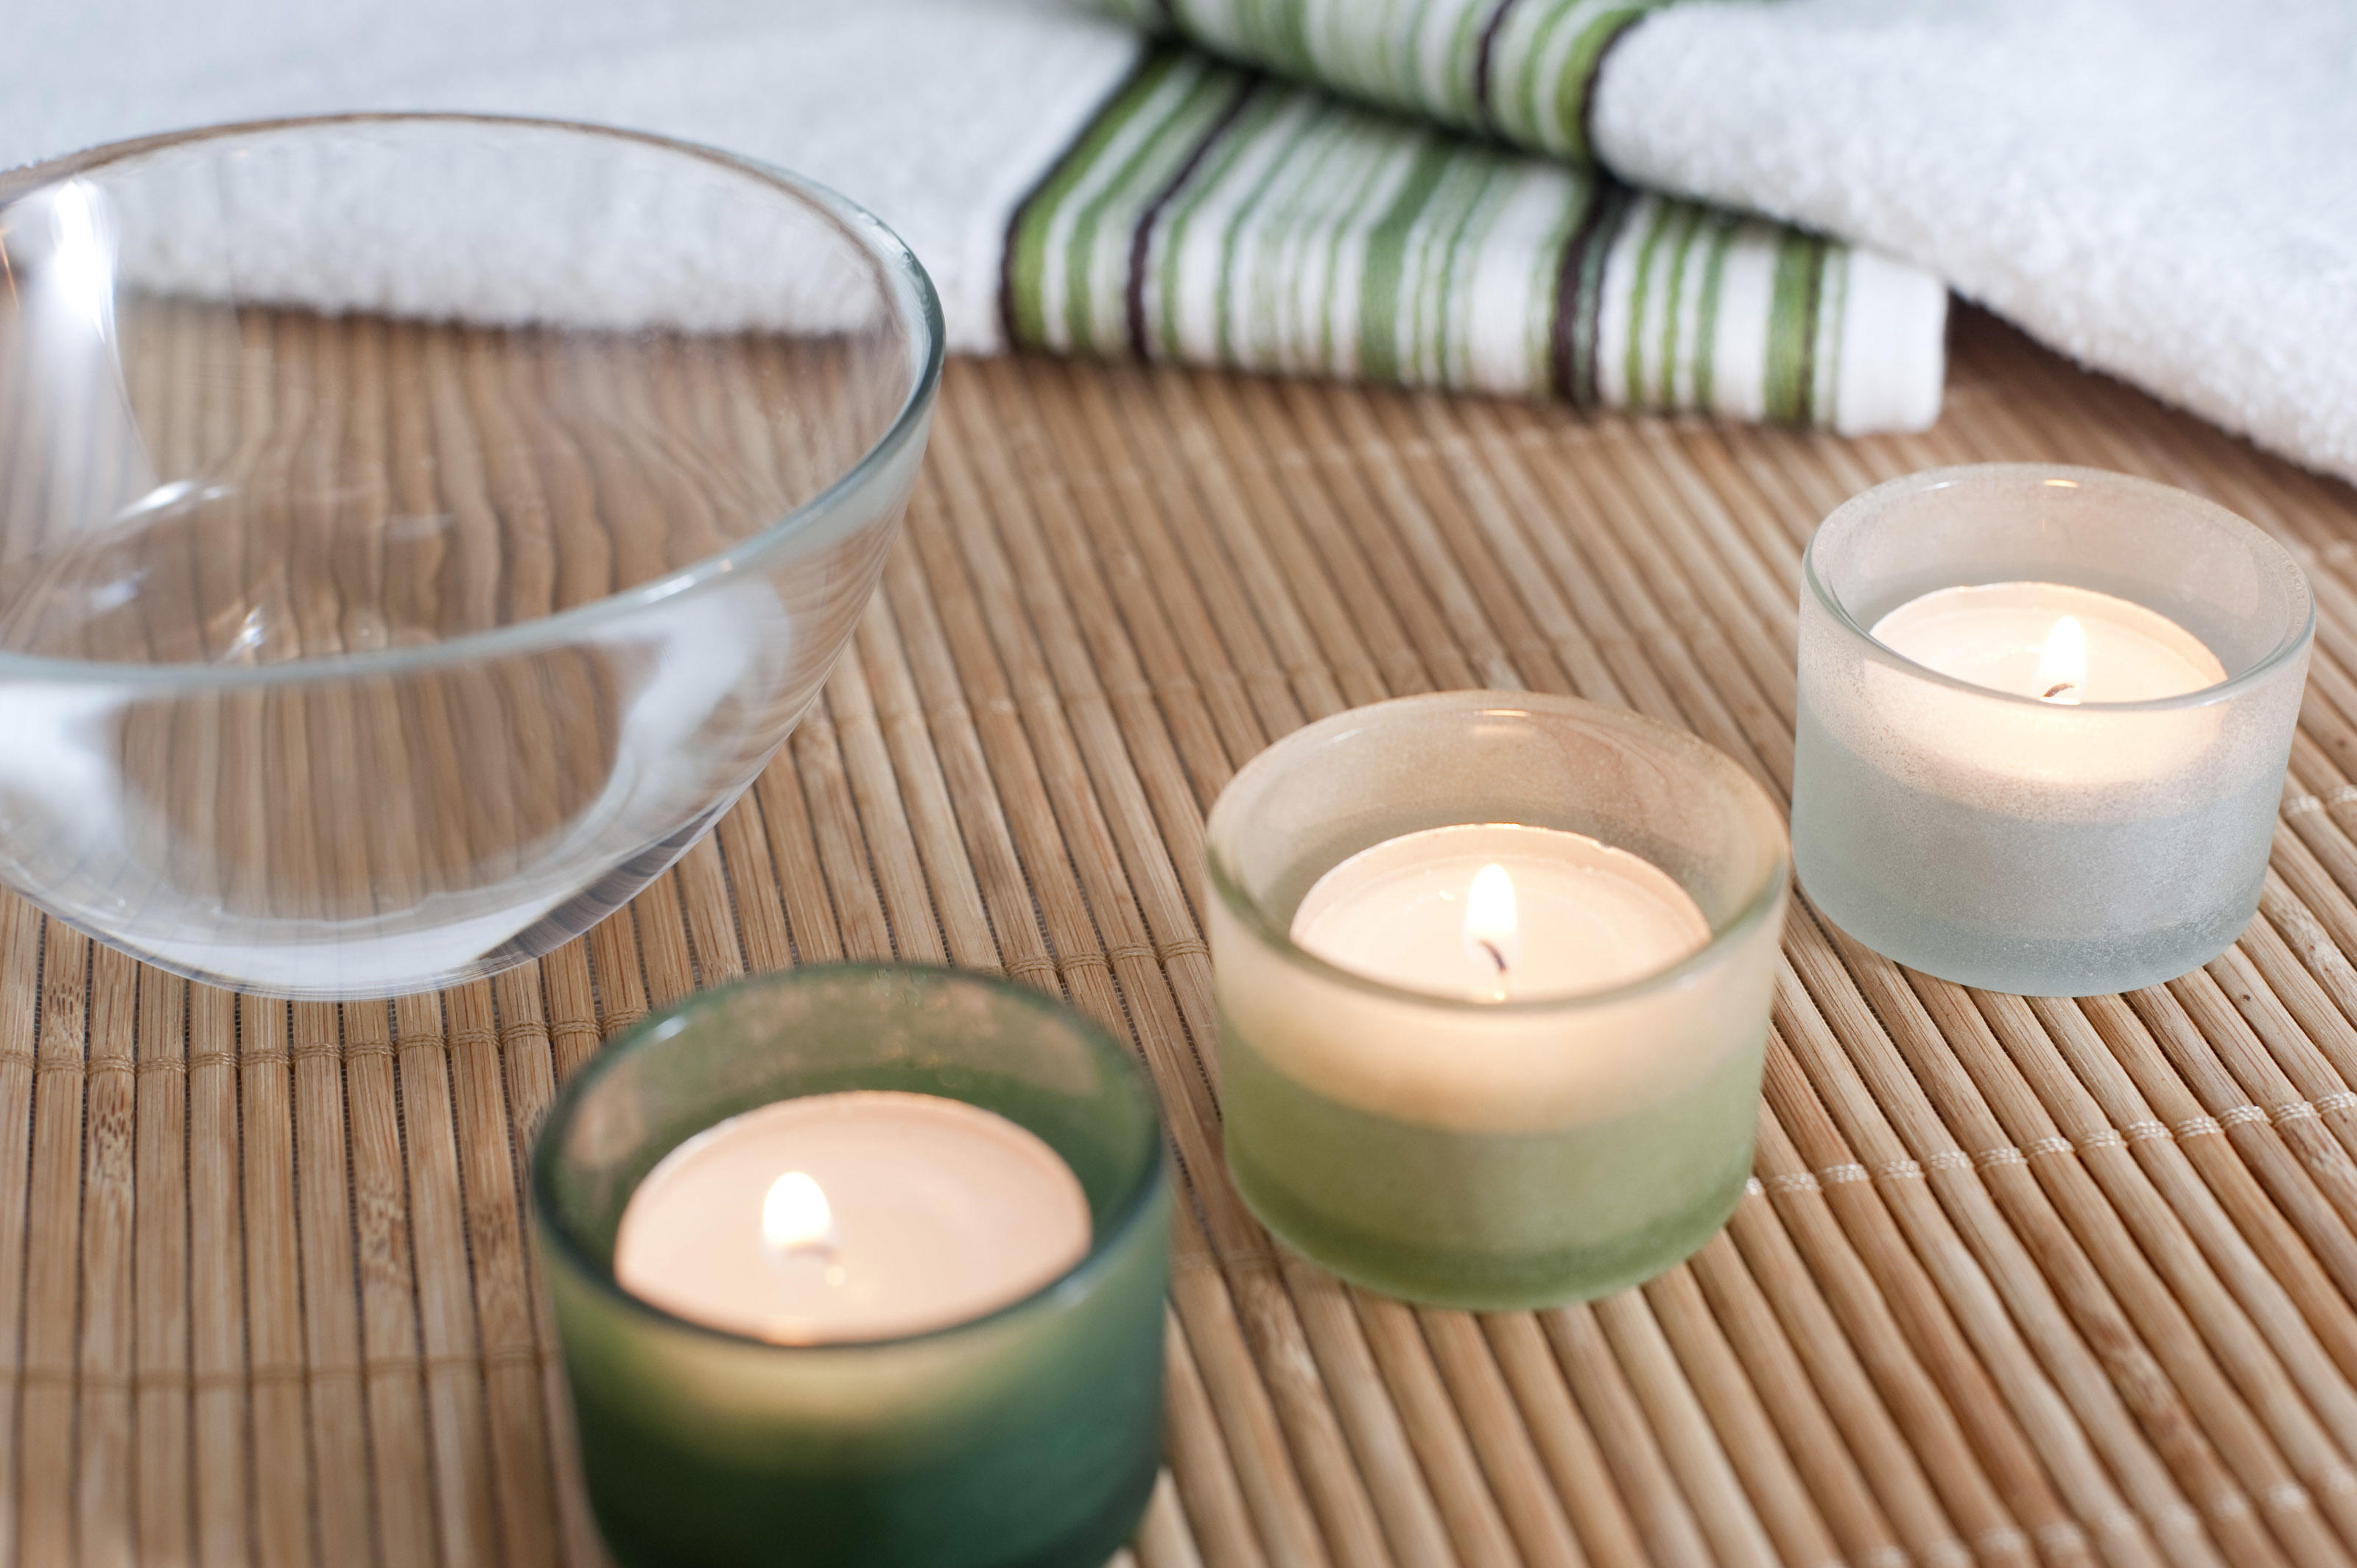 Aromatherapy candles | Fragrant candles light the mood of petty bourgeoisie life